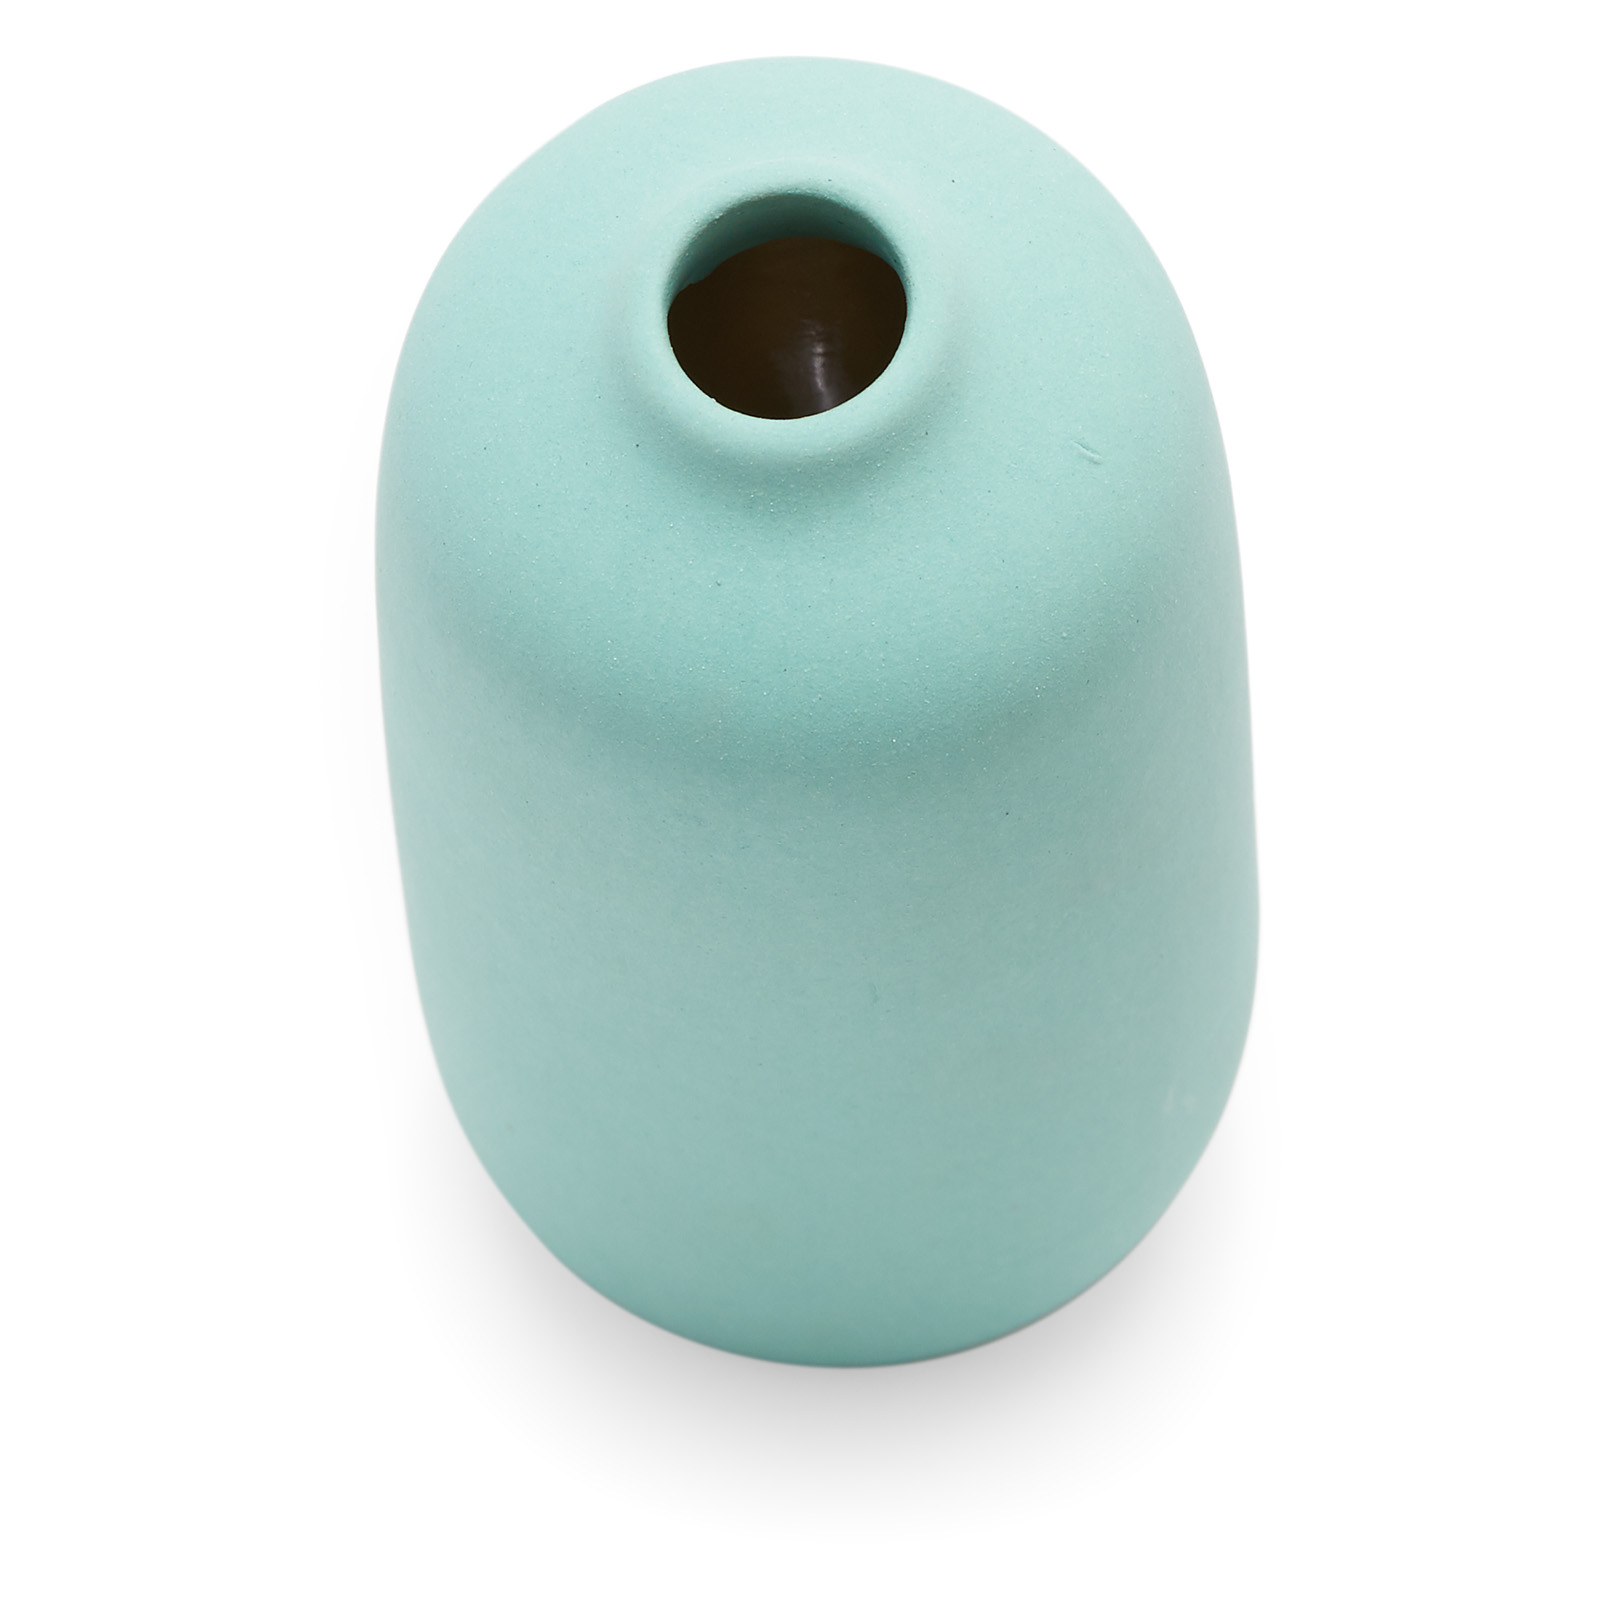 Galway Green Decorative Vase by Drew Barrymore Flower Home - image 3 of 7